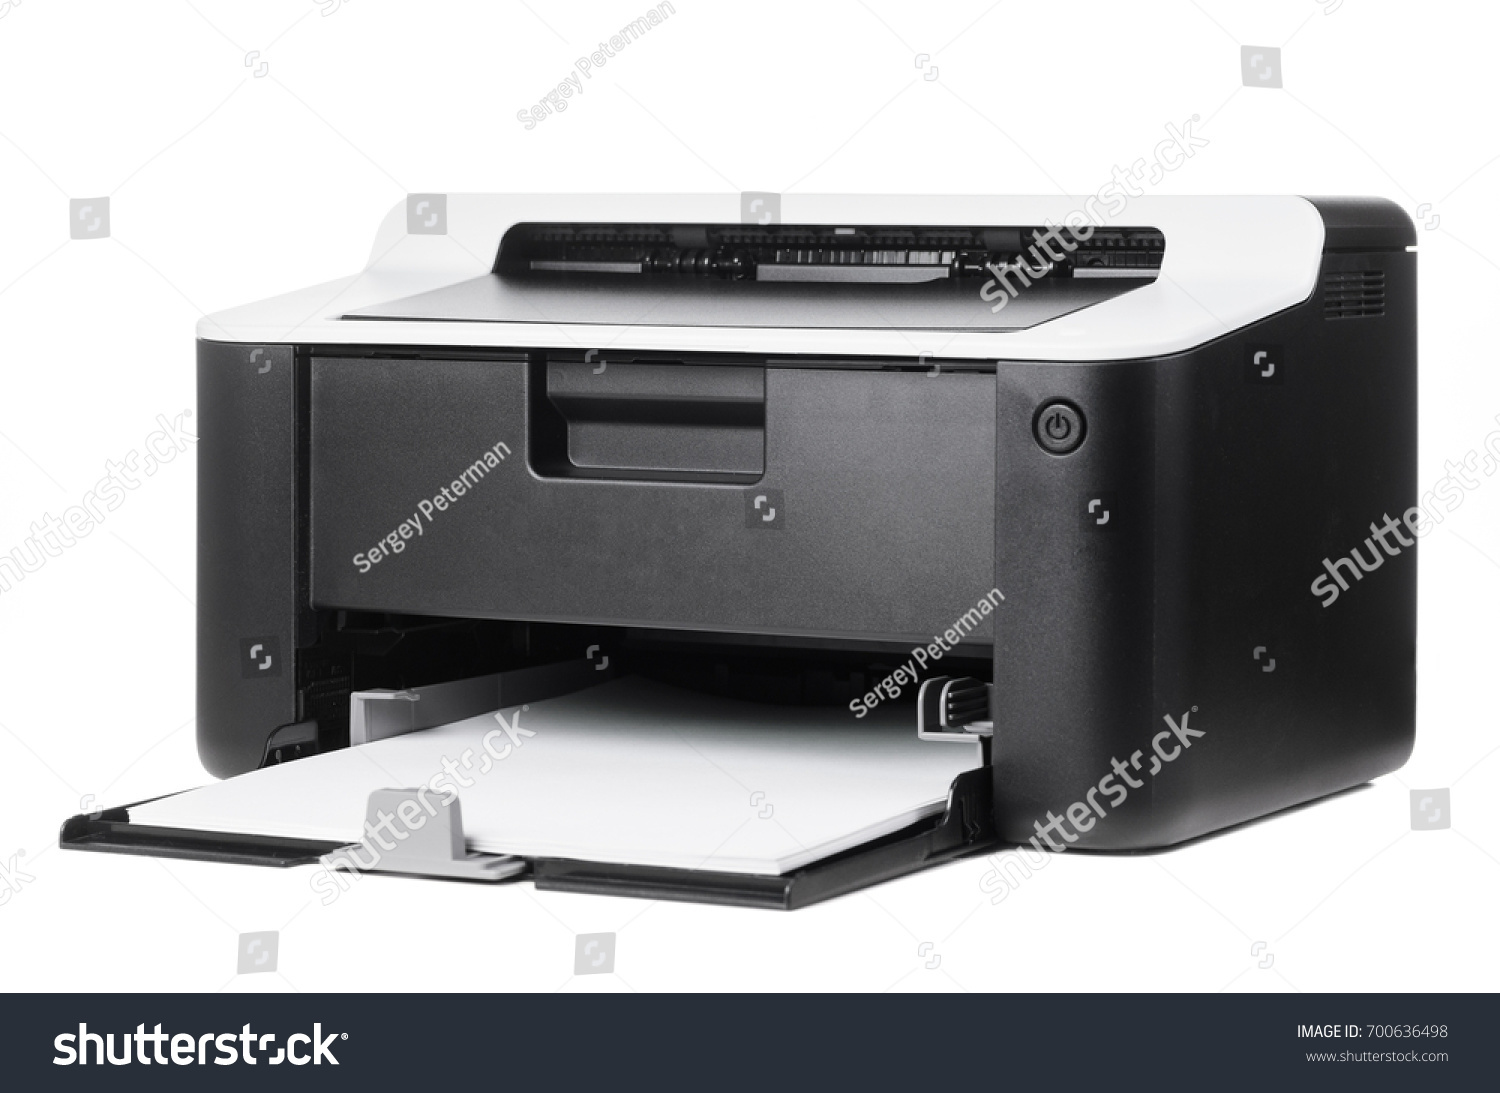 Compact laser home printer isolated on white background #700636498